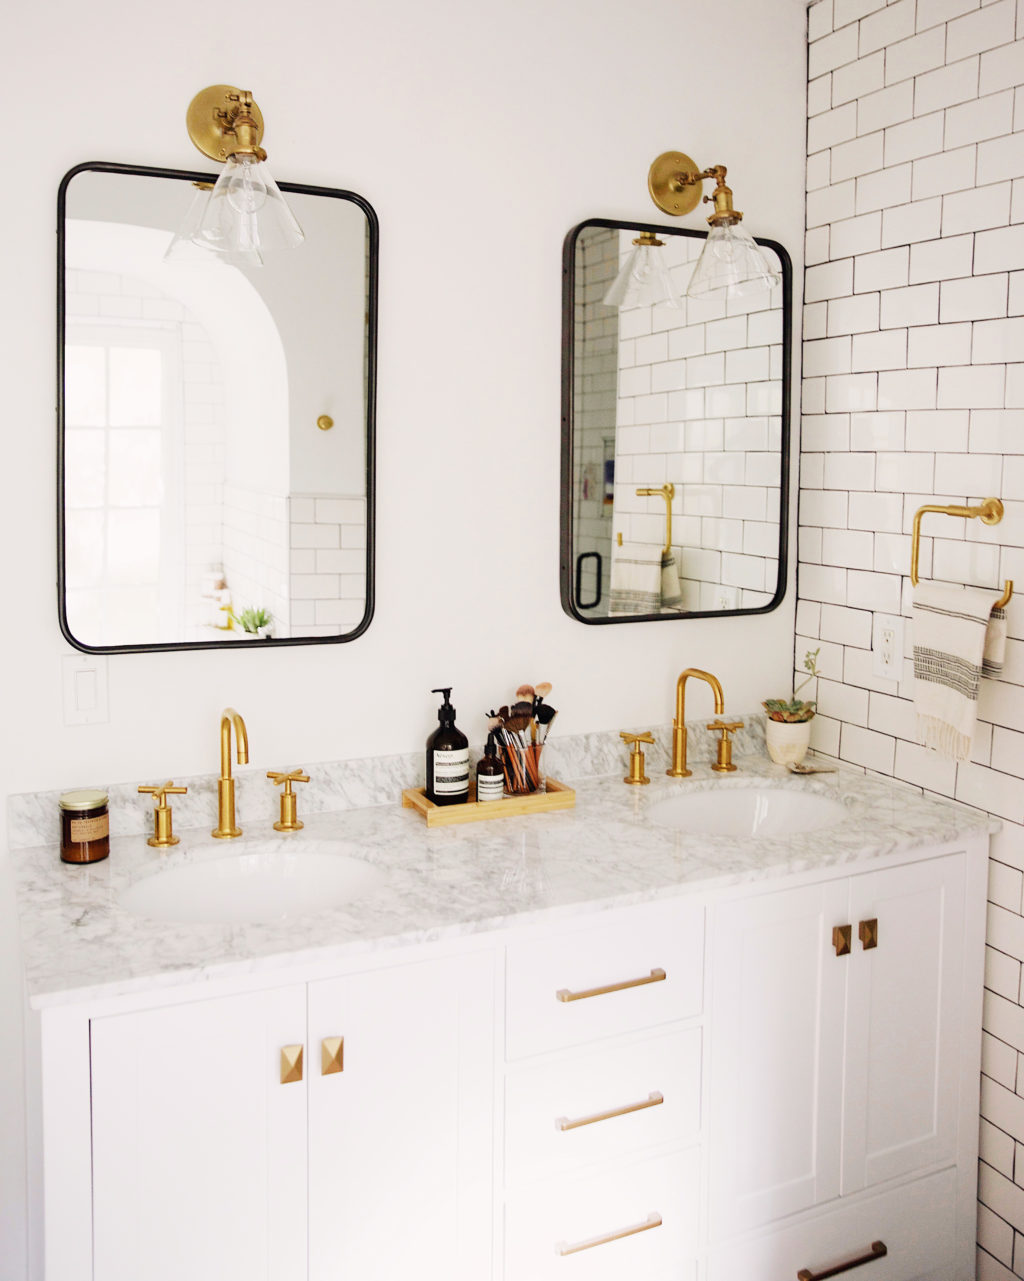 Our Master Bathroom: The Reveal - New Darlings